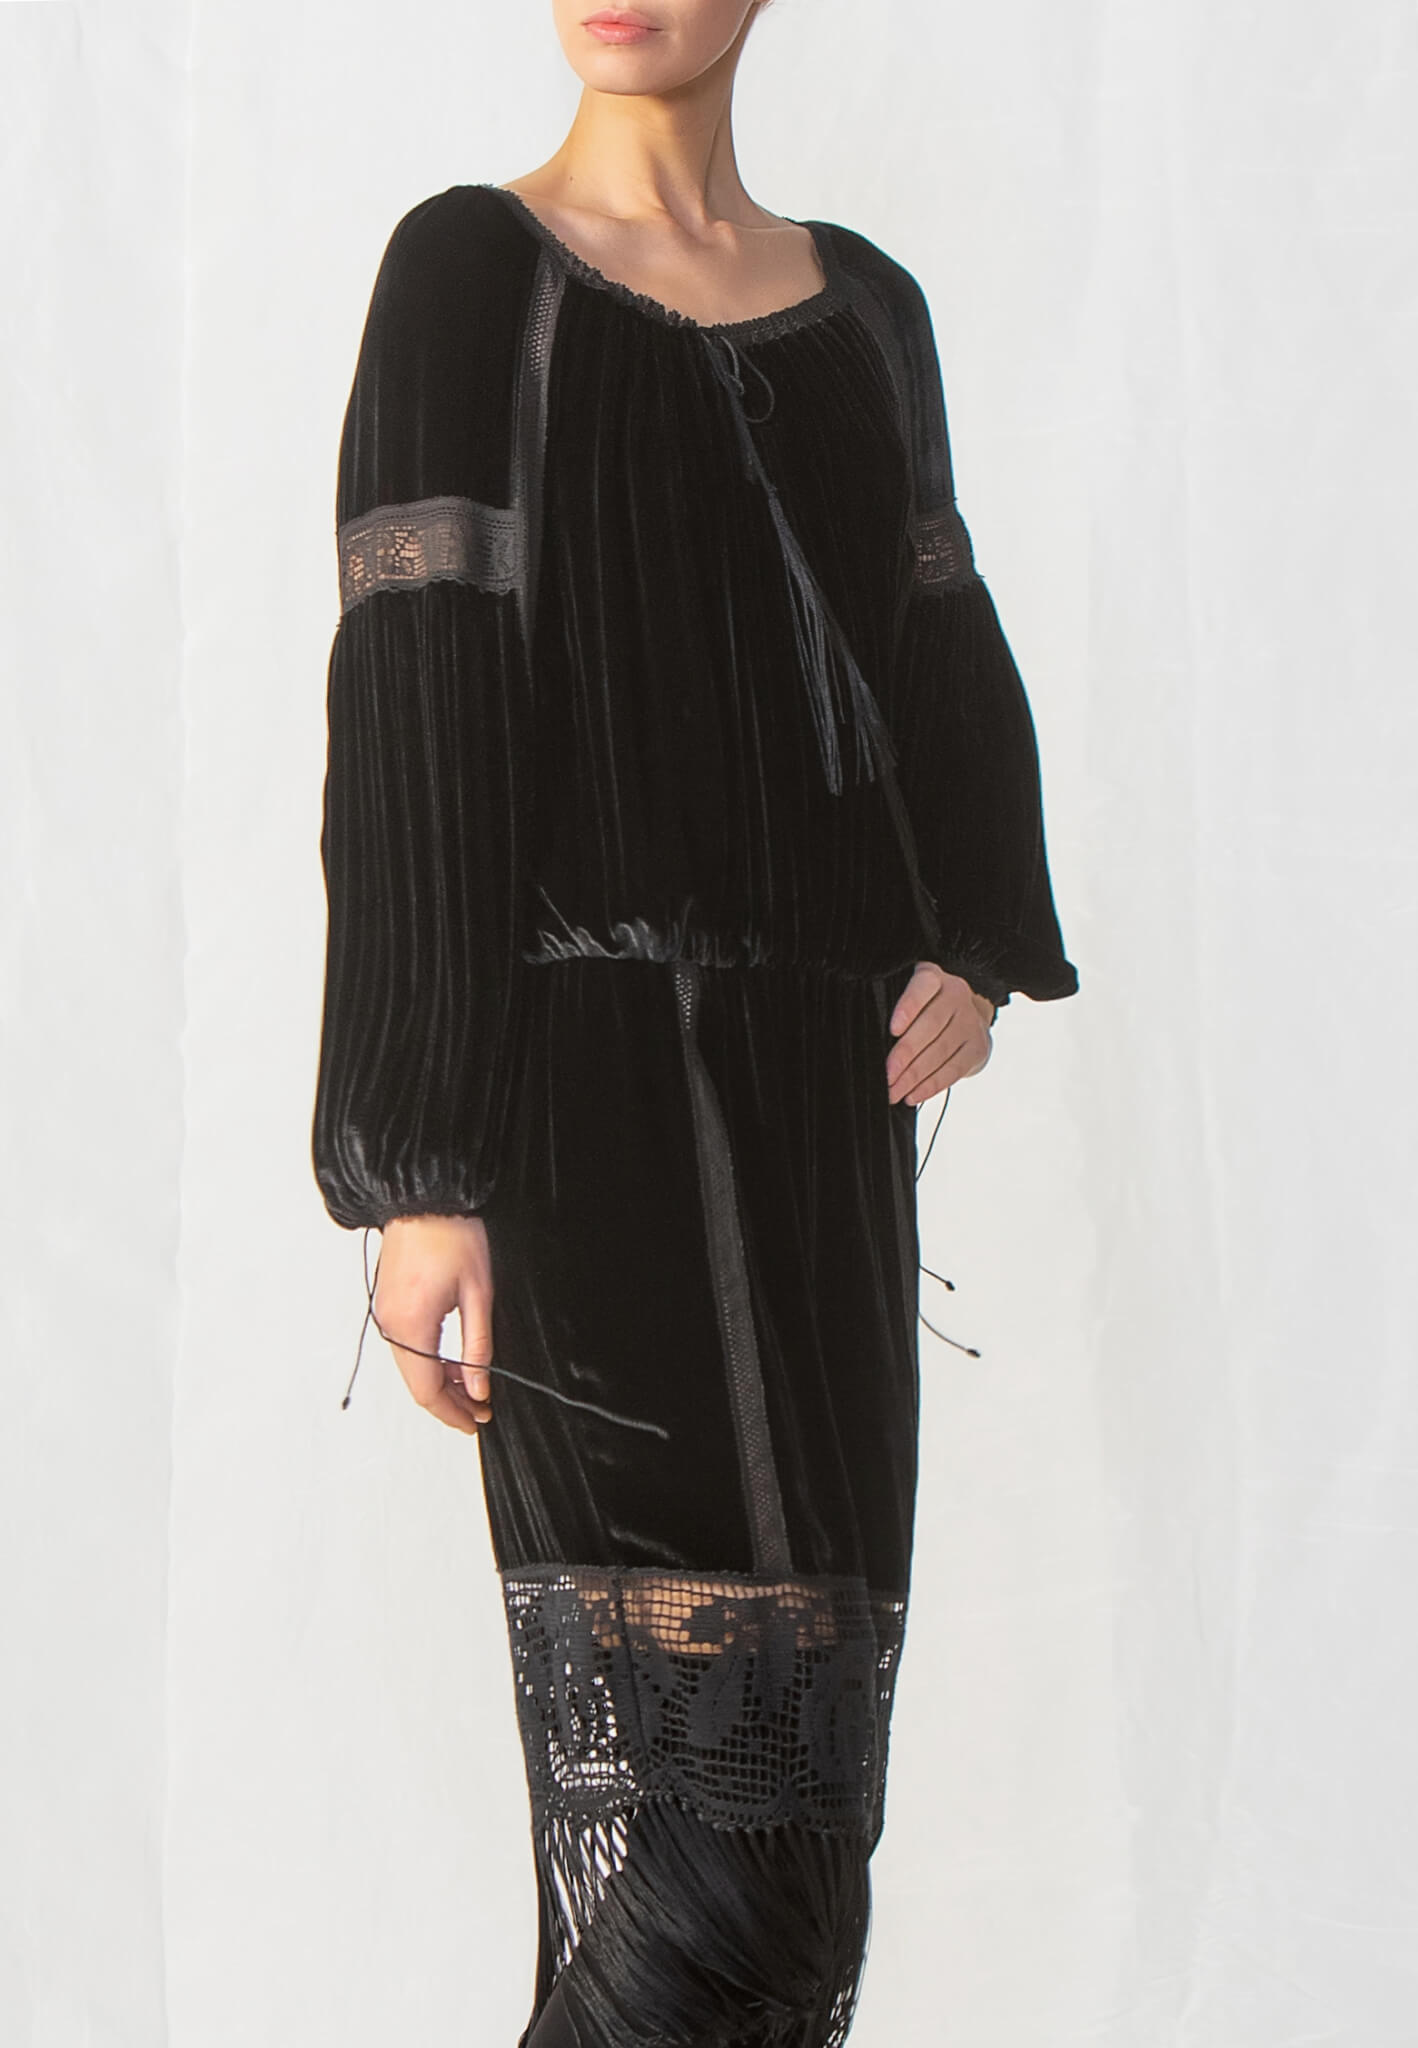 Black velour dress with lace